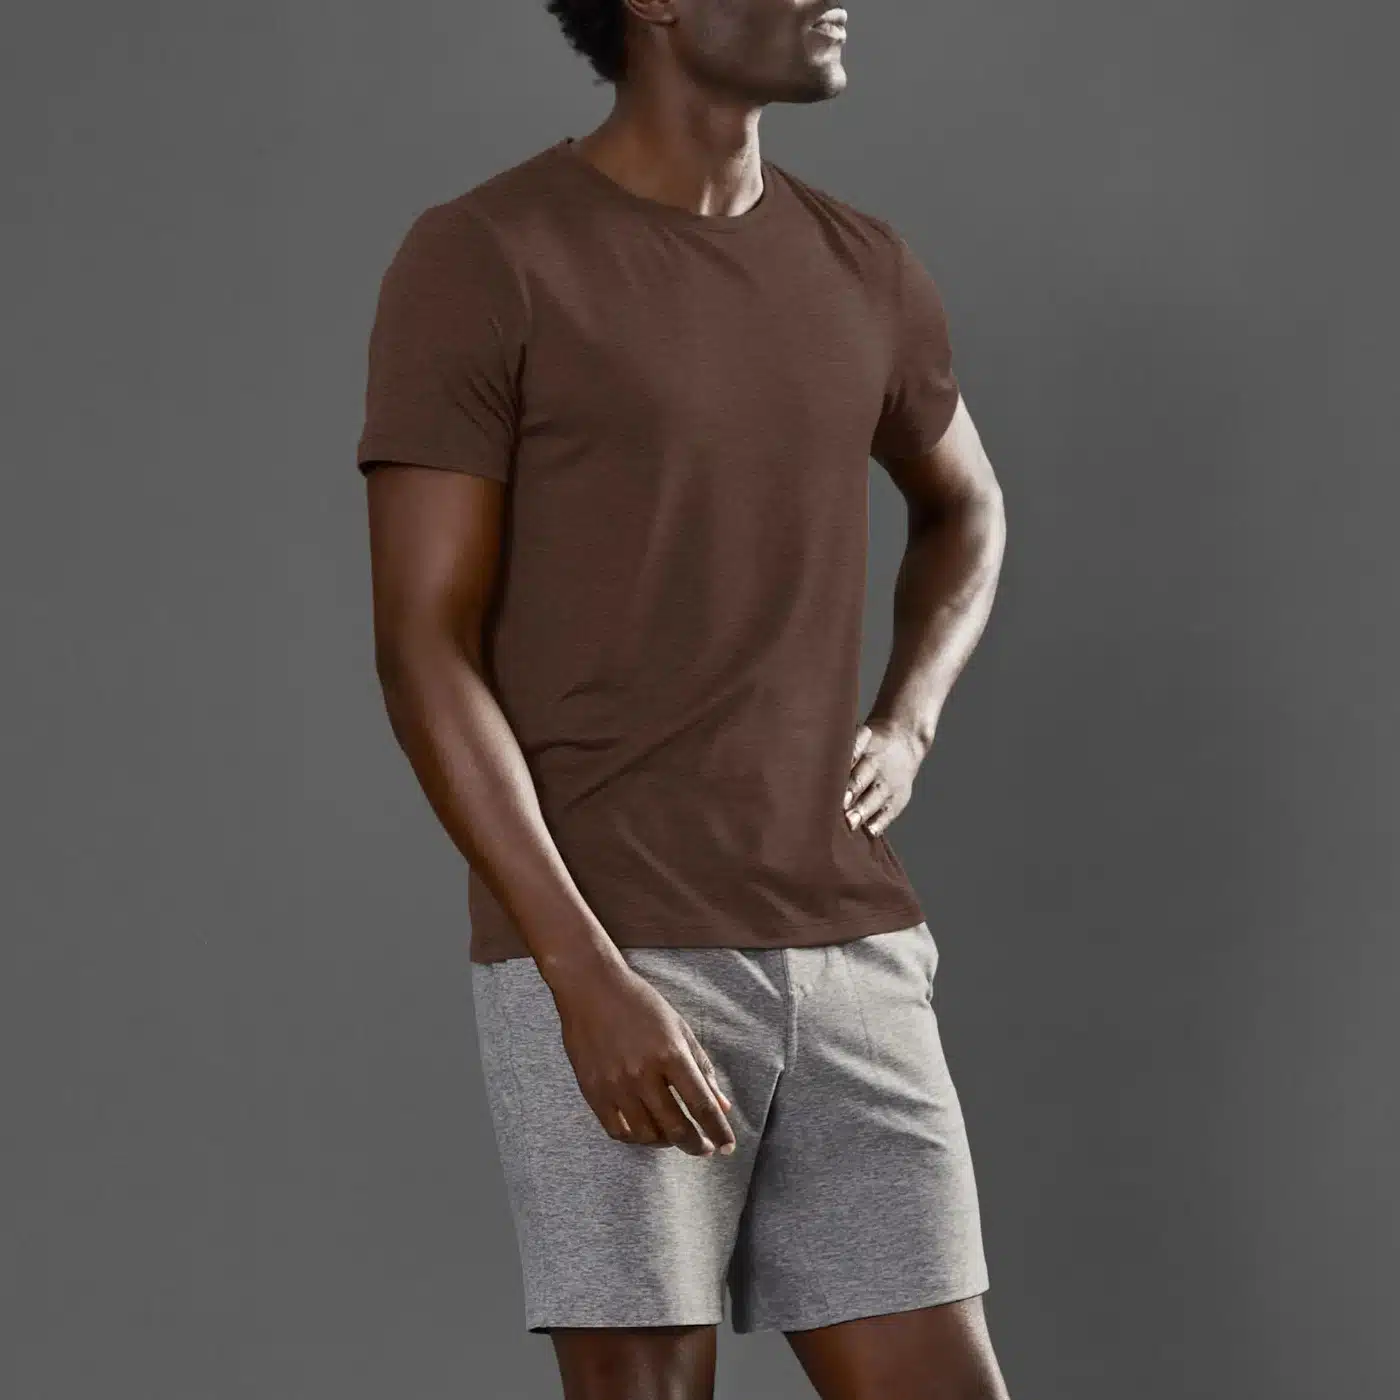 Best Yoga Clothes for Men: 4 Brands for Flexing in Style - The